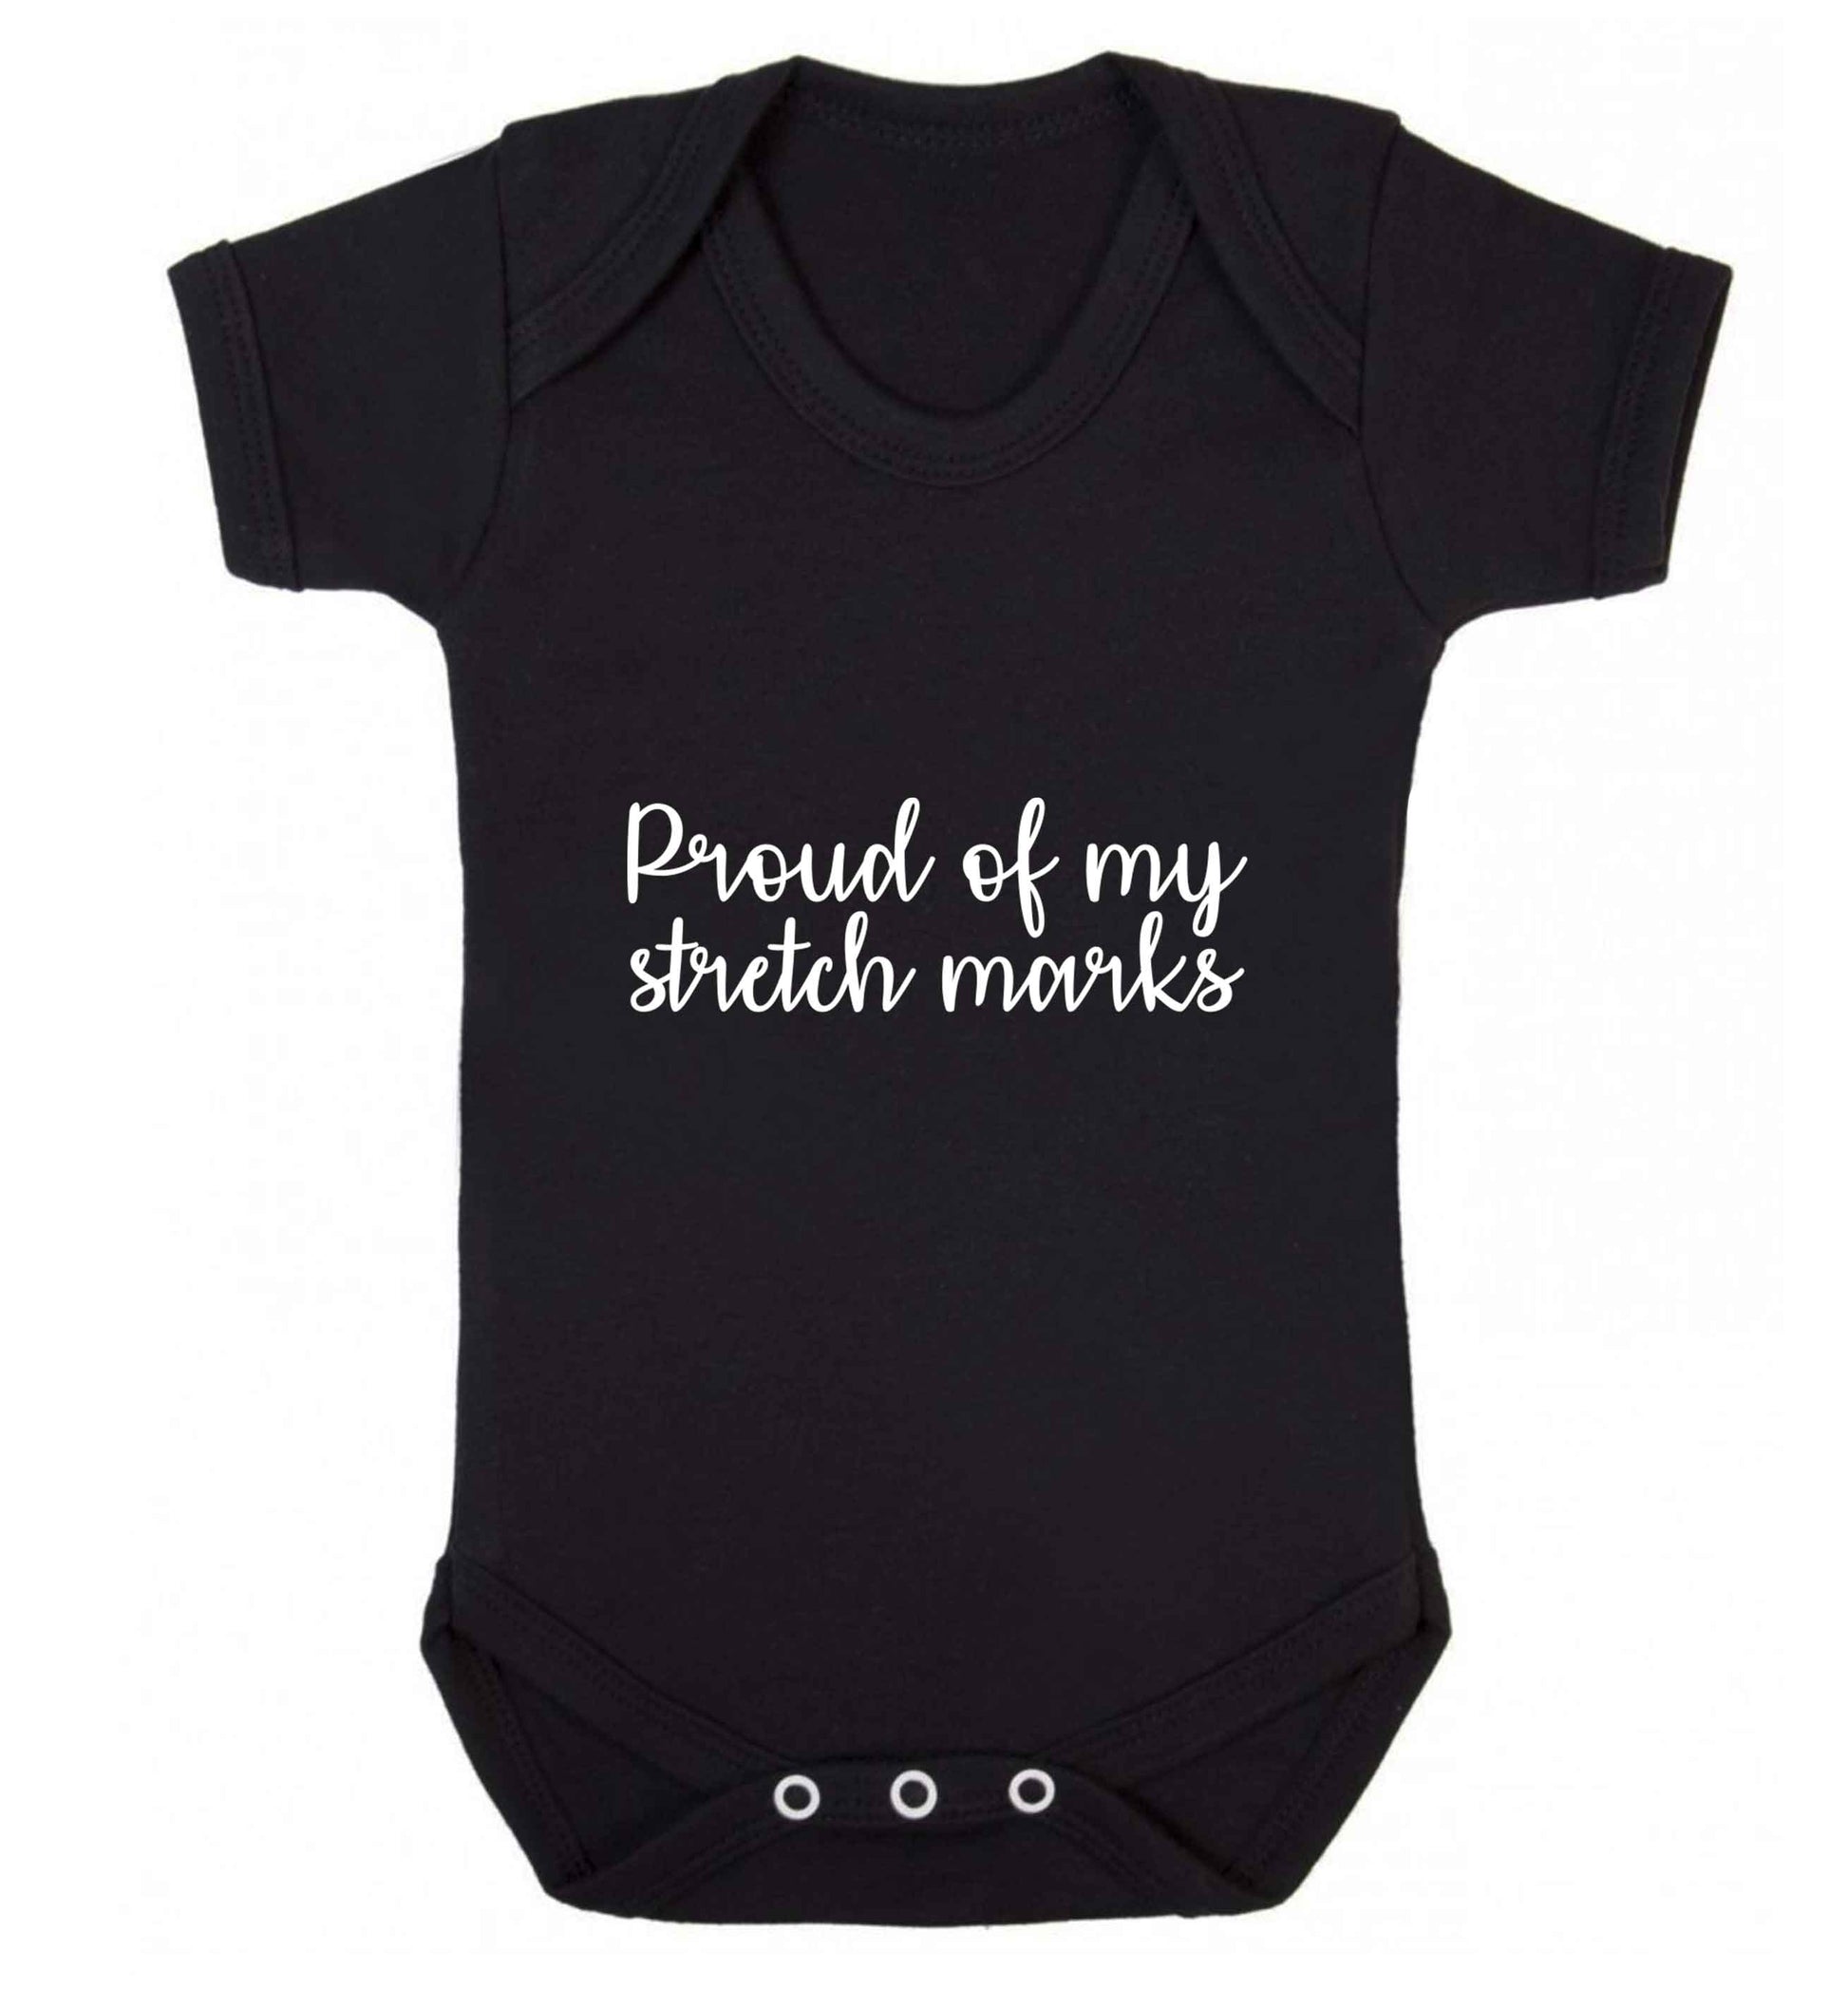 Proud of my stretch marks baby vest black 18-24 months